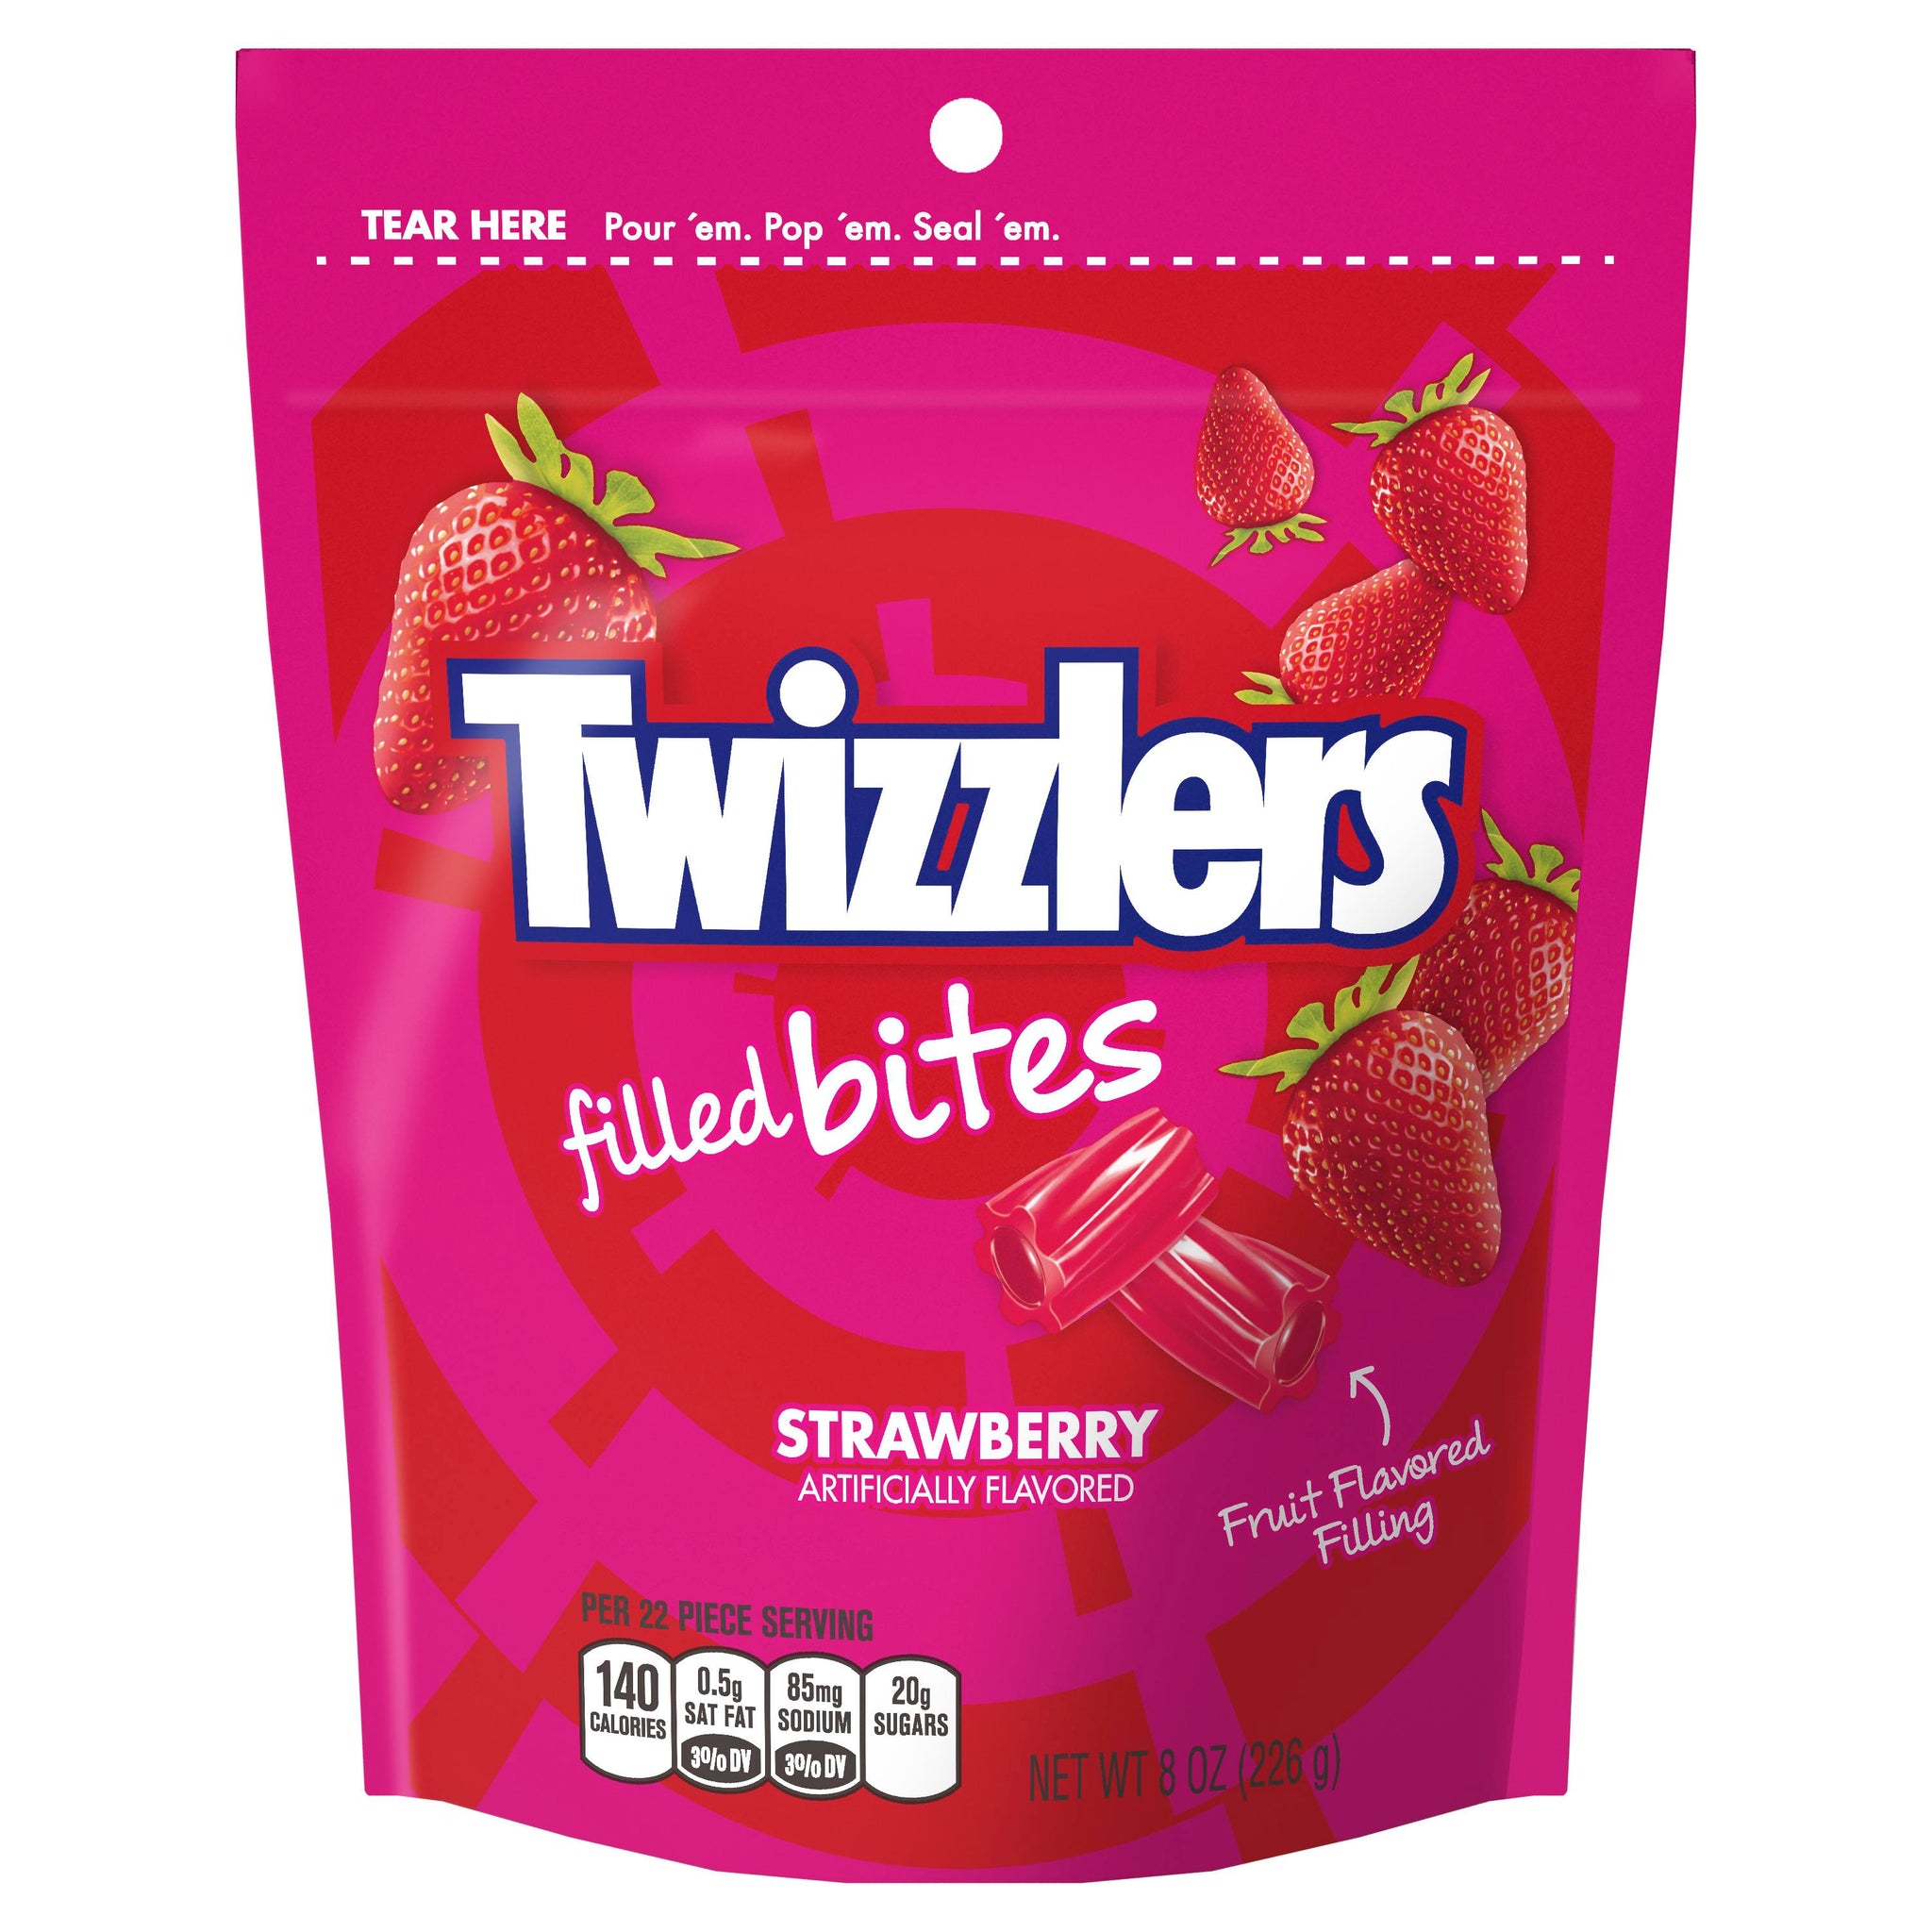 Twizzlers Filled Bites Strawberry Flavored, 8oz. Standup Resealable Bag